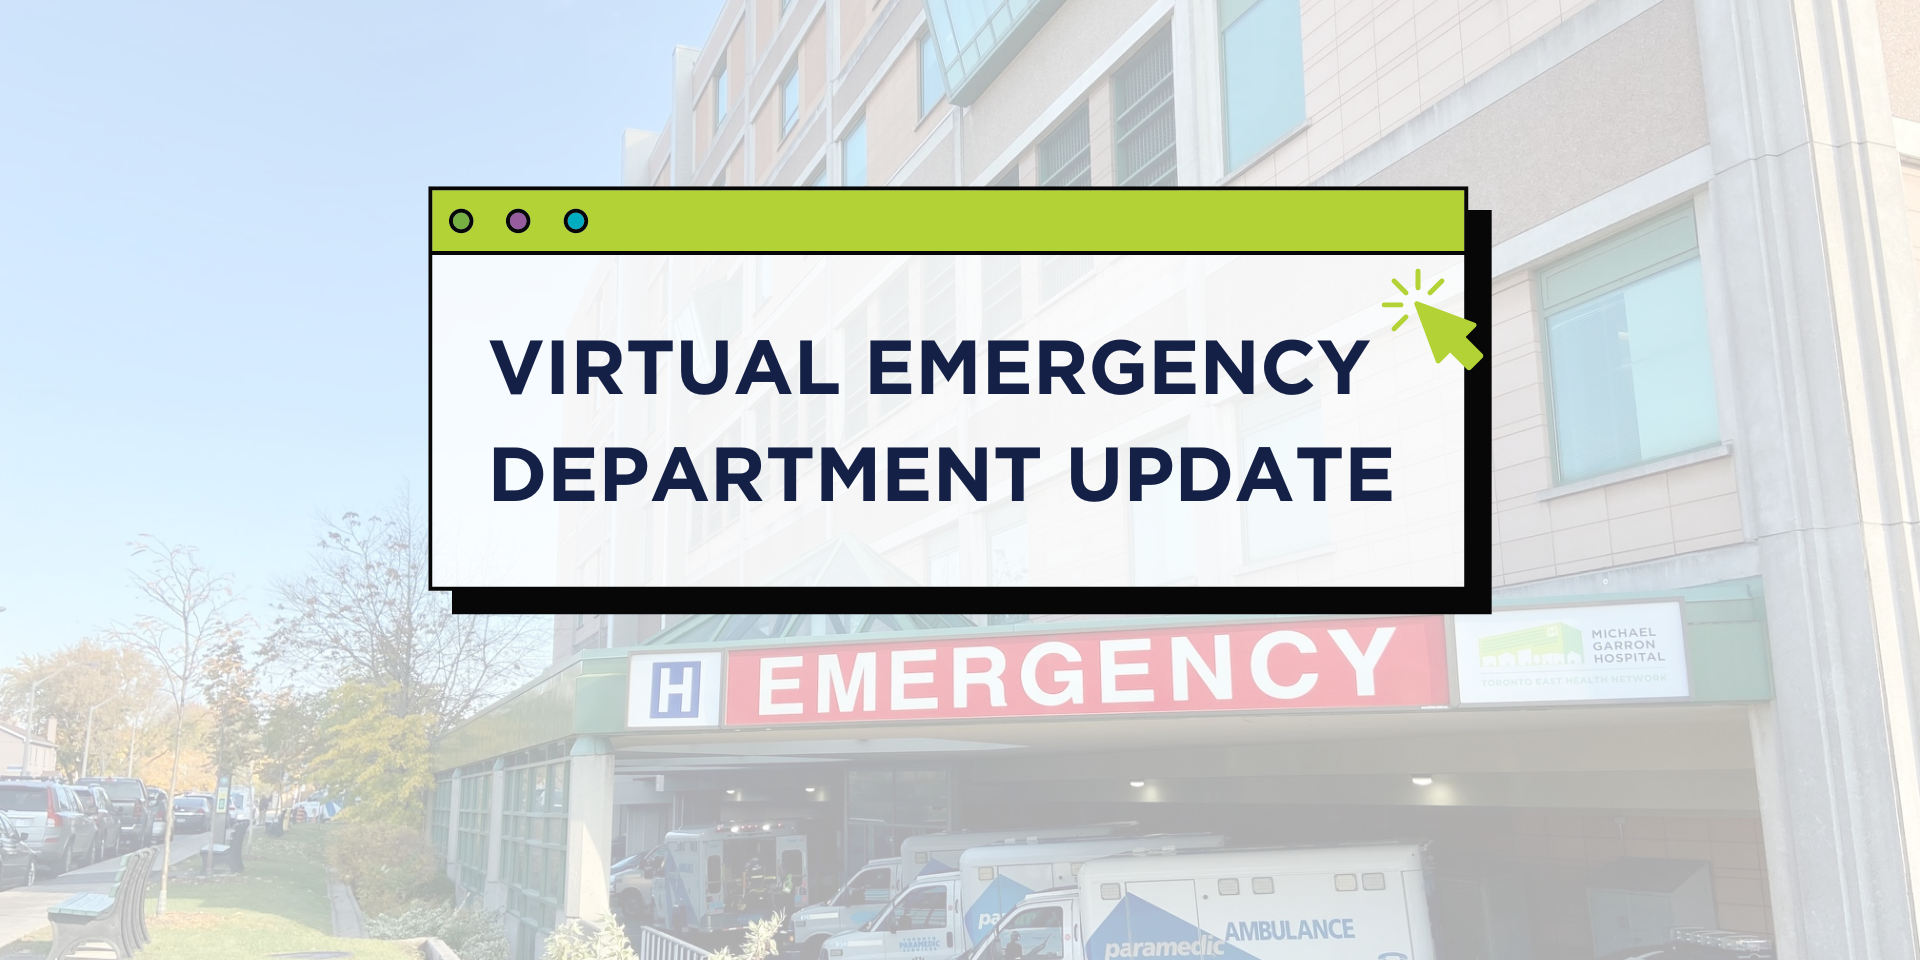 Text that says Virtual Emergency Department Update on top of image of Michael Garron Hospital's Emergency Department sign.